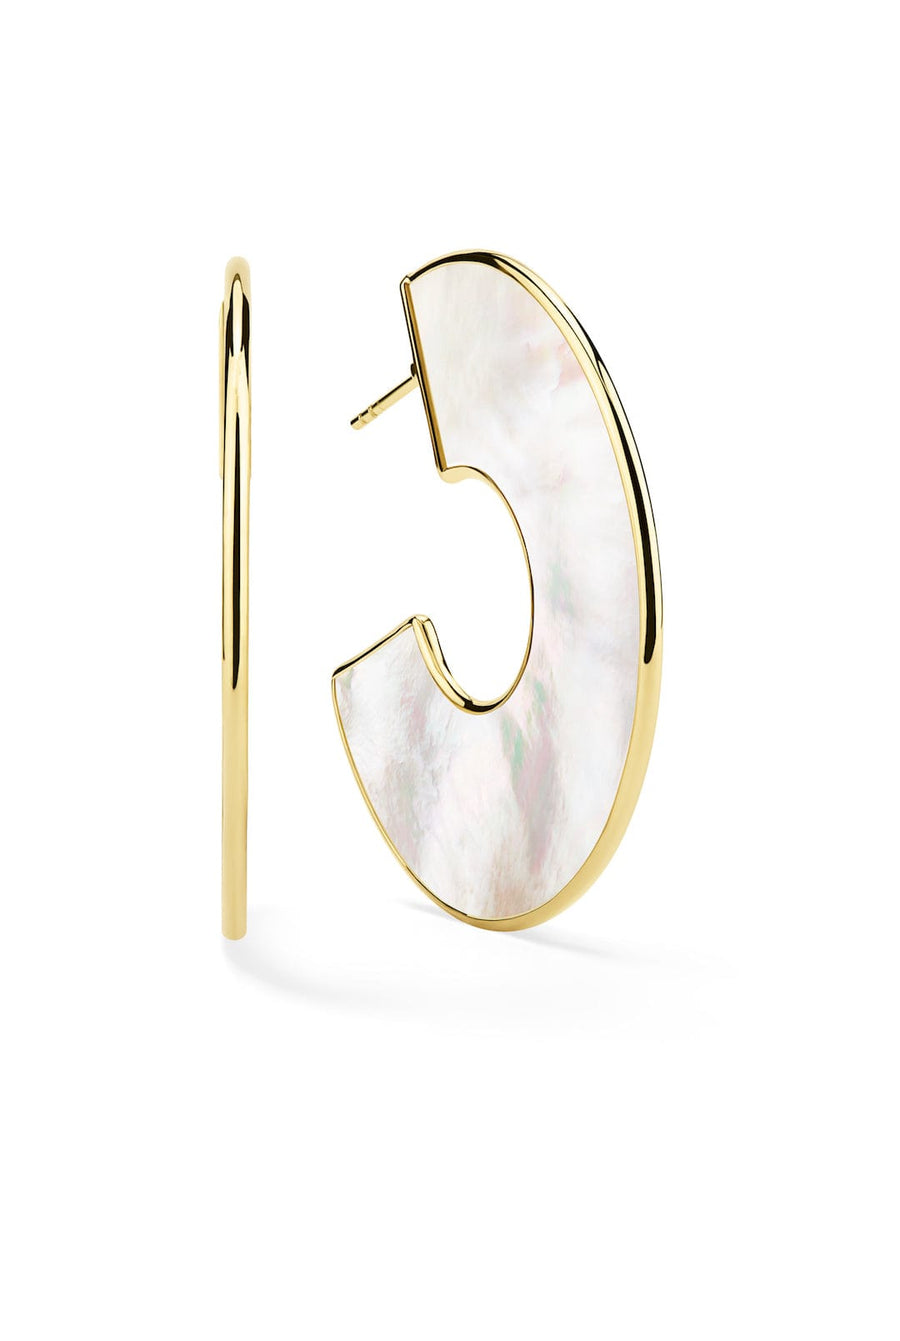 Ippolita Jewellery - Earrings - Stud Ippolita Yellow Gold and Mother-of-Pearl Cut-Out Donut Shape Slice Earrings